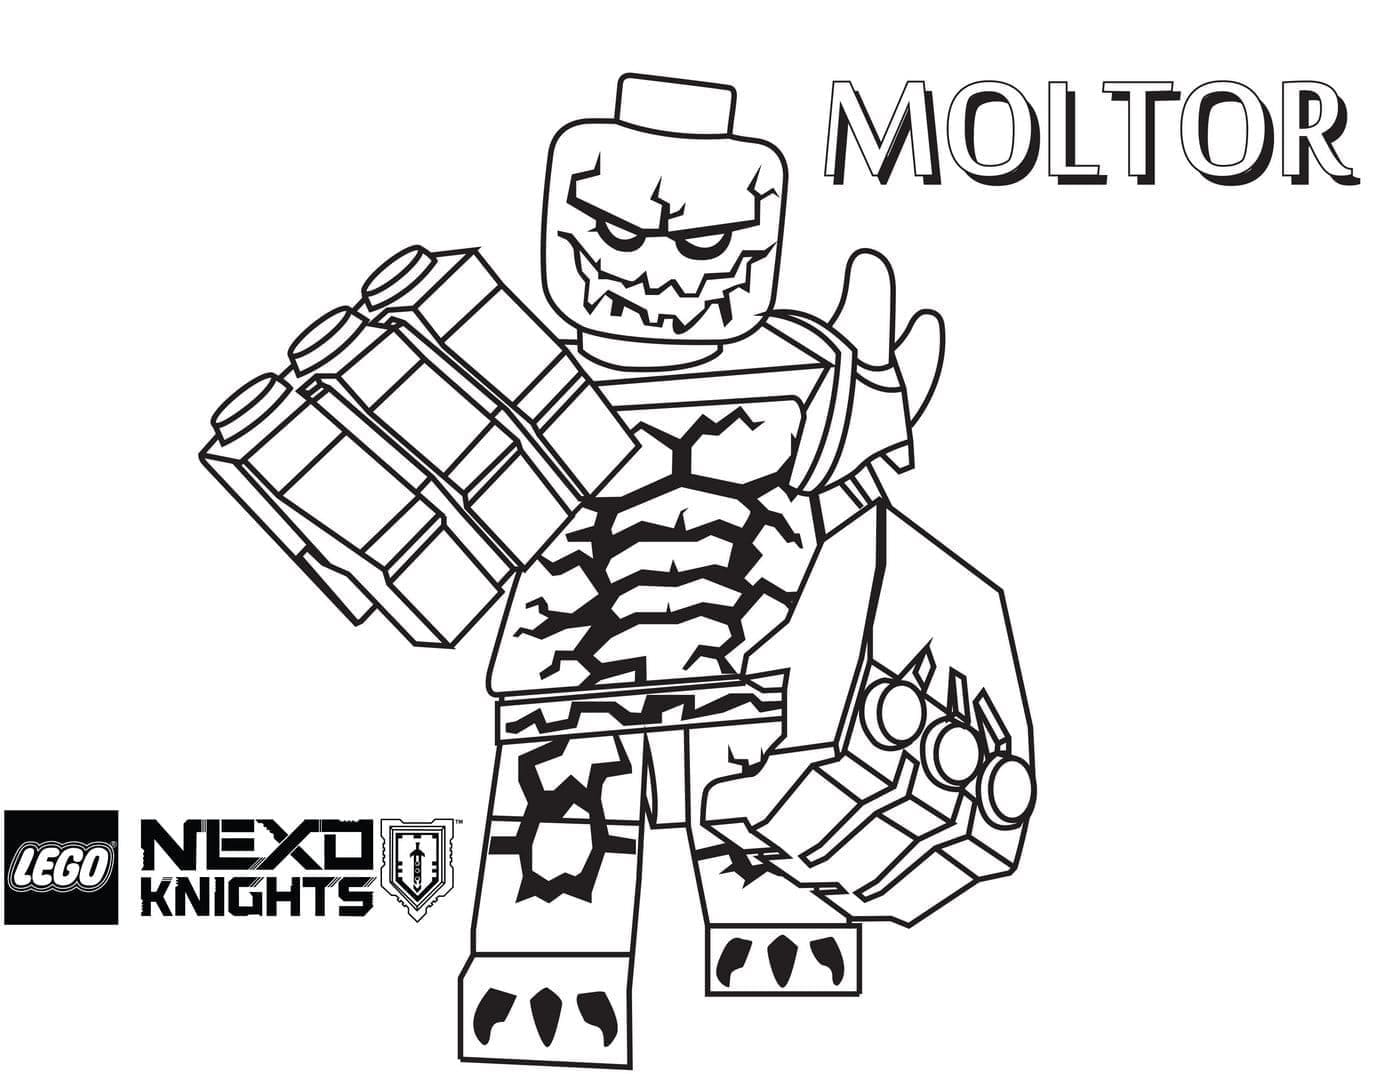 Lego Nexo Knights Moltor coloring page